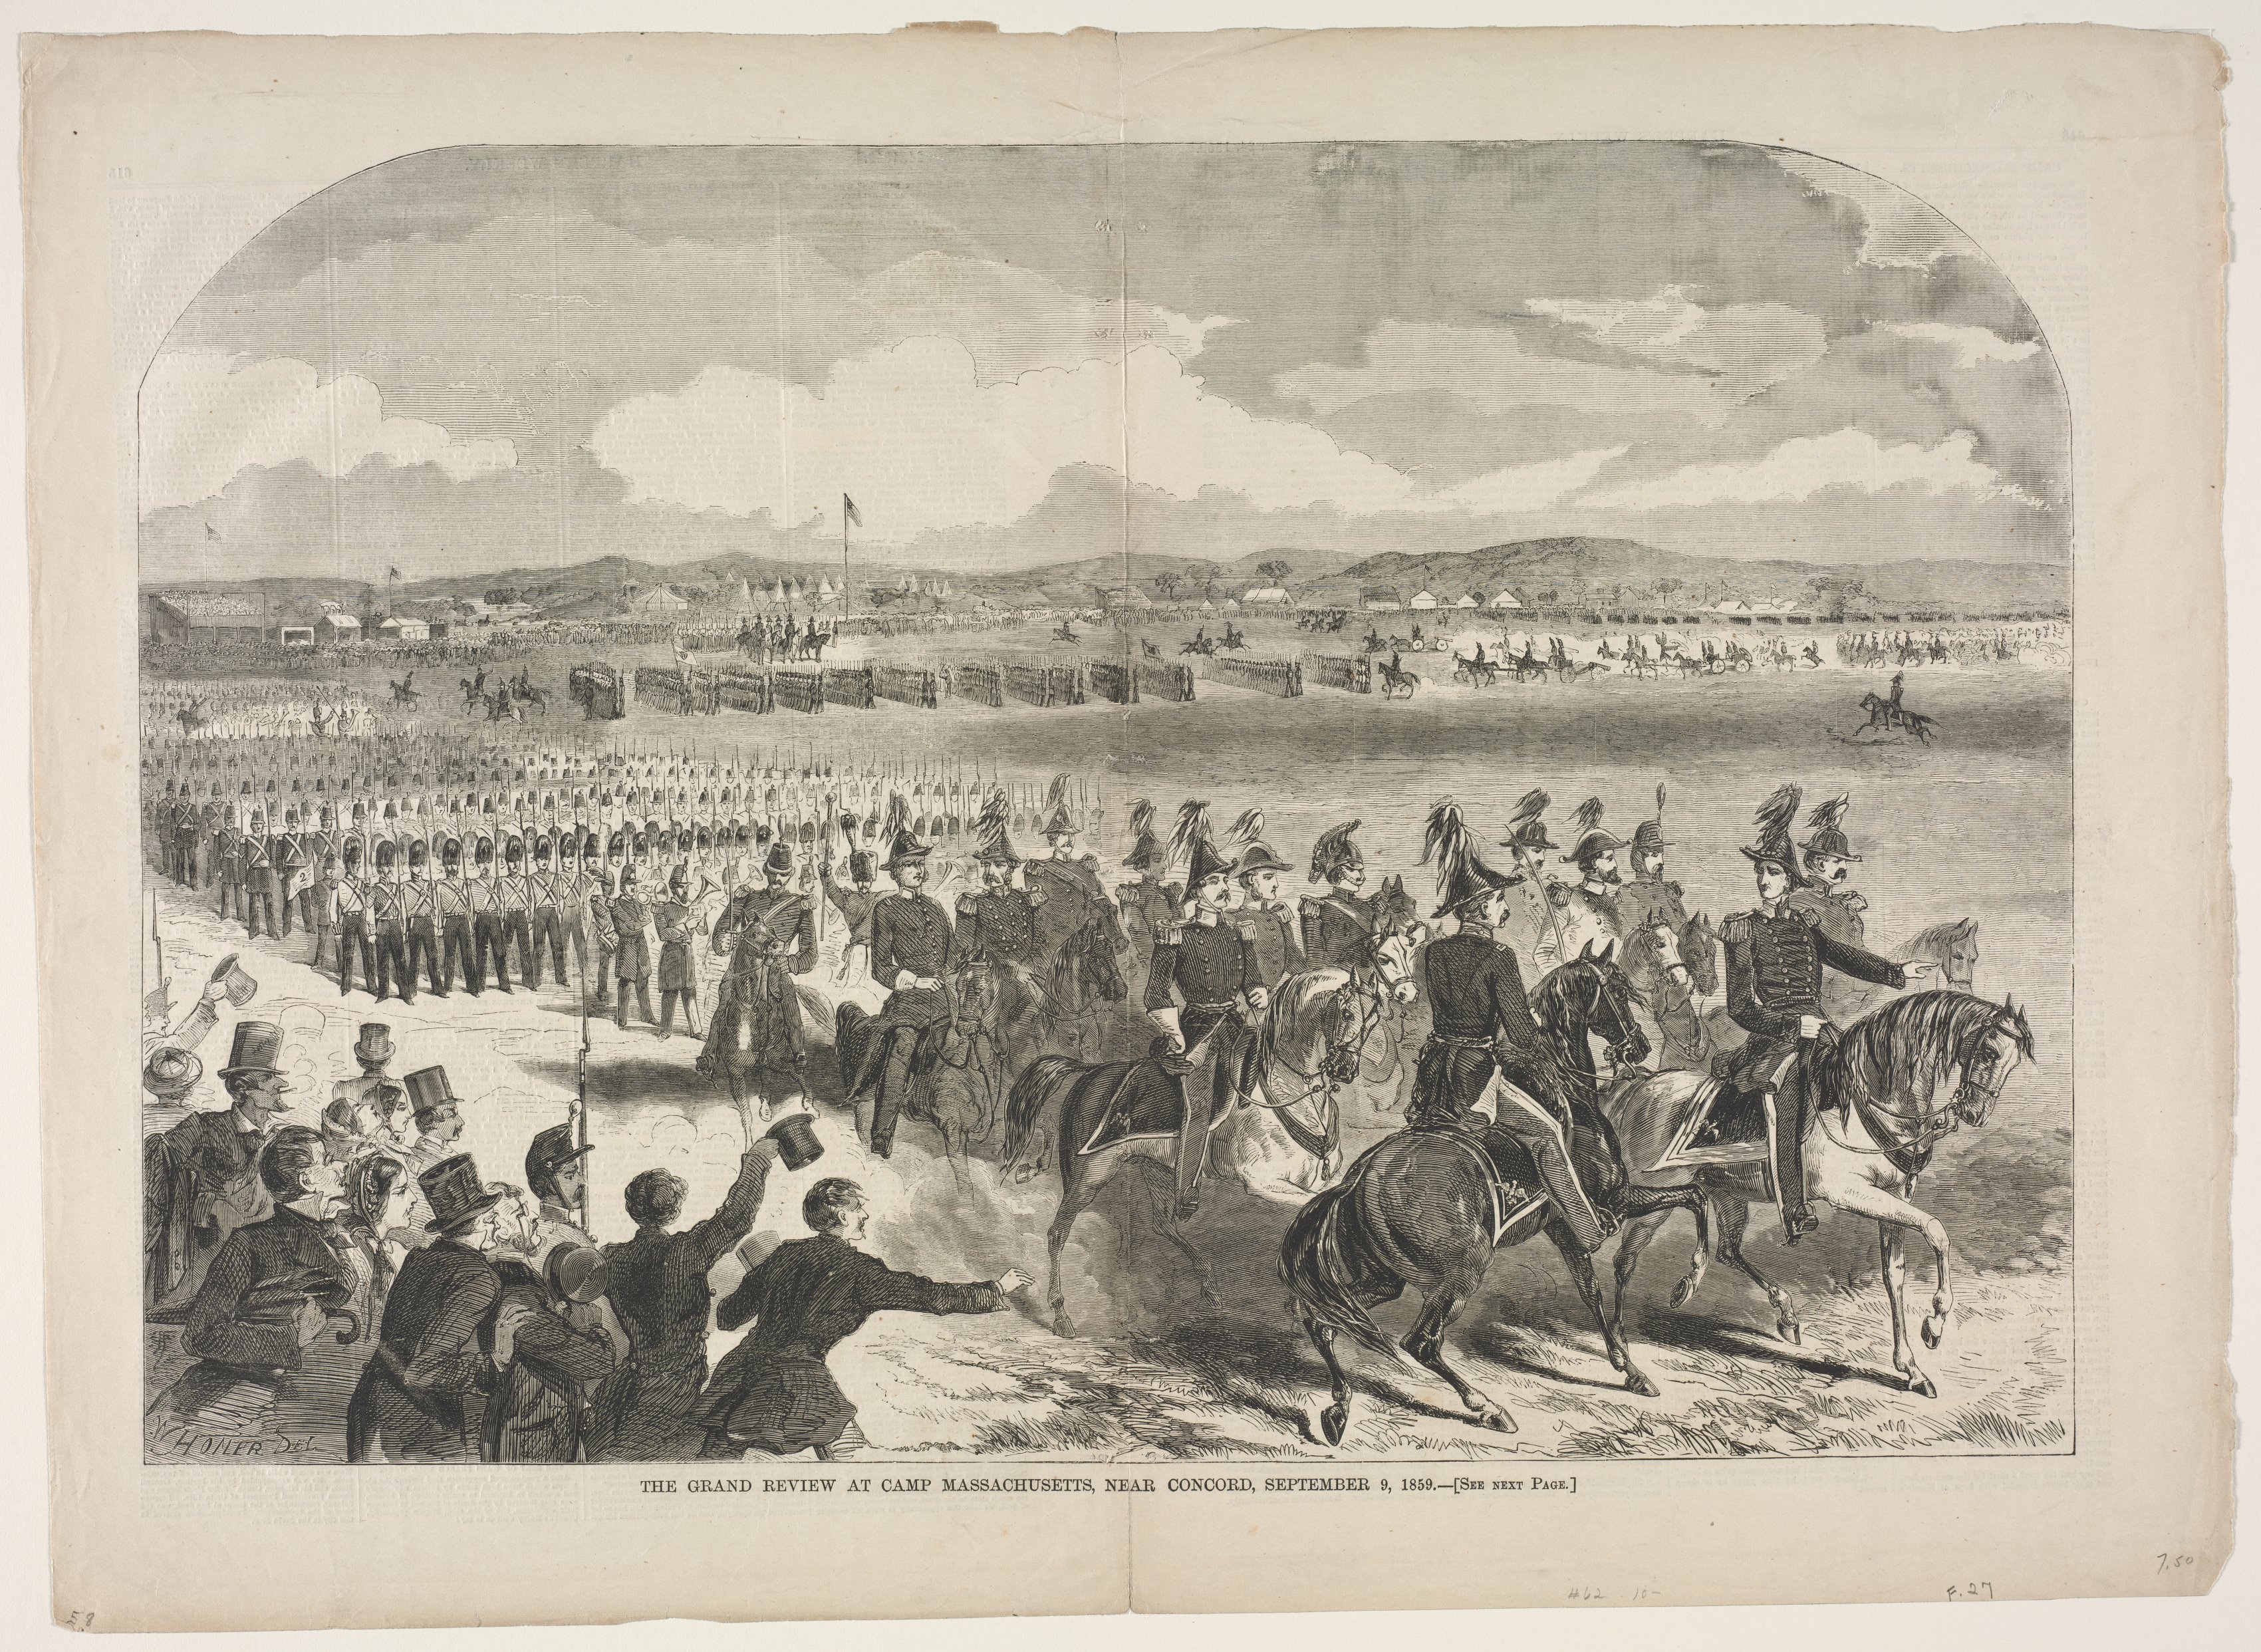 The Grand Review at Camp Massachusetts, near Concord, September 9, 1859